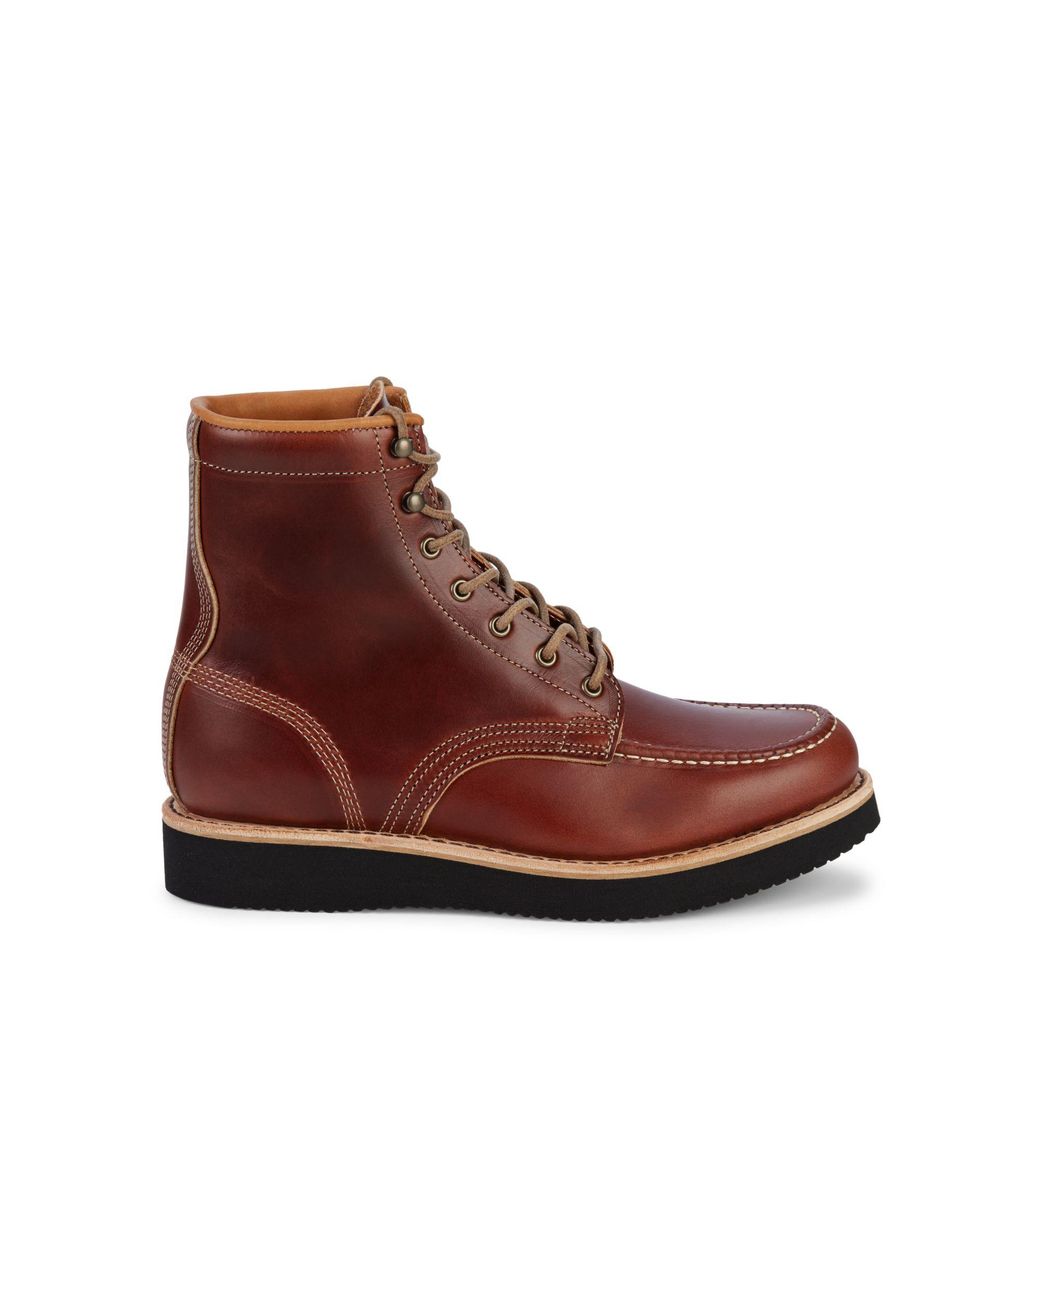 Timberland American Craft Moc-toe Leather Boots in Brown for Men